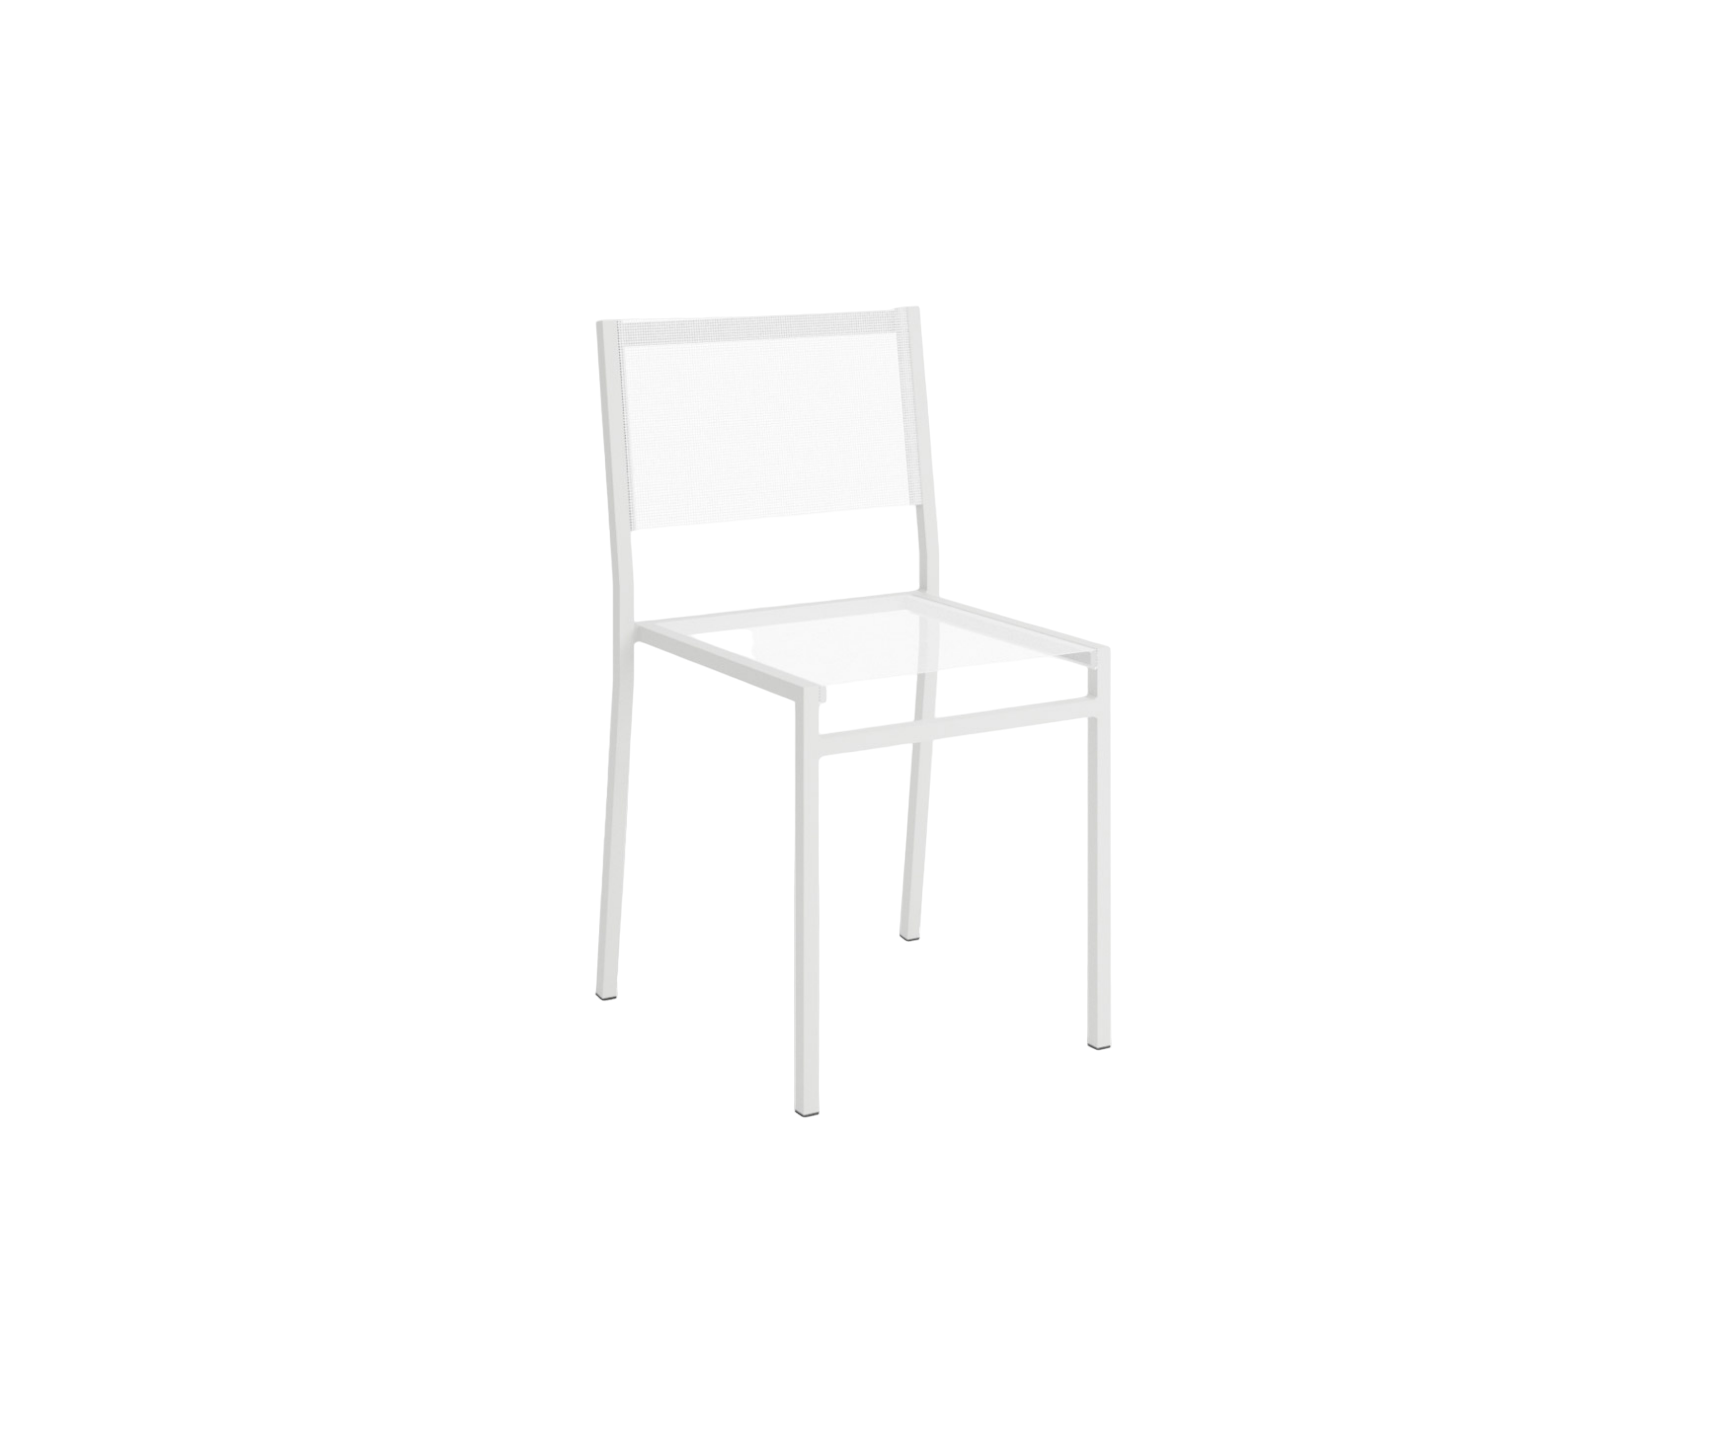 45 Dining Chair | Oiside